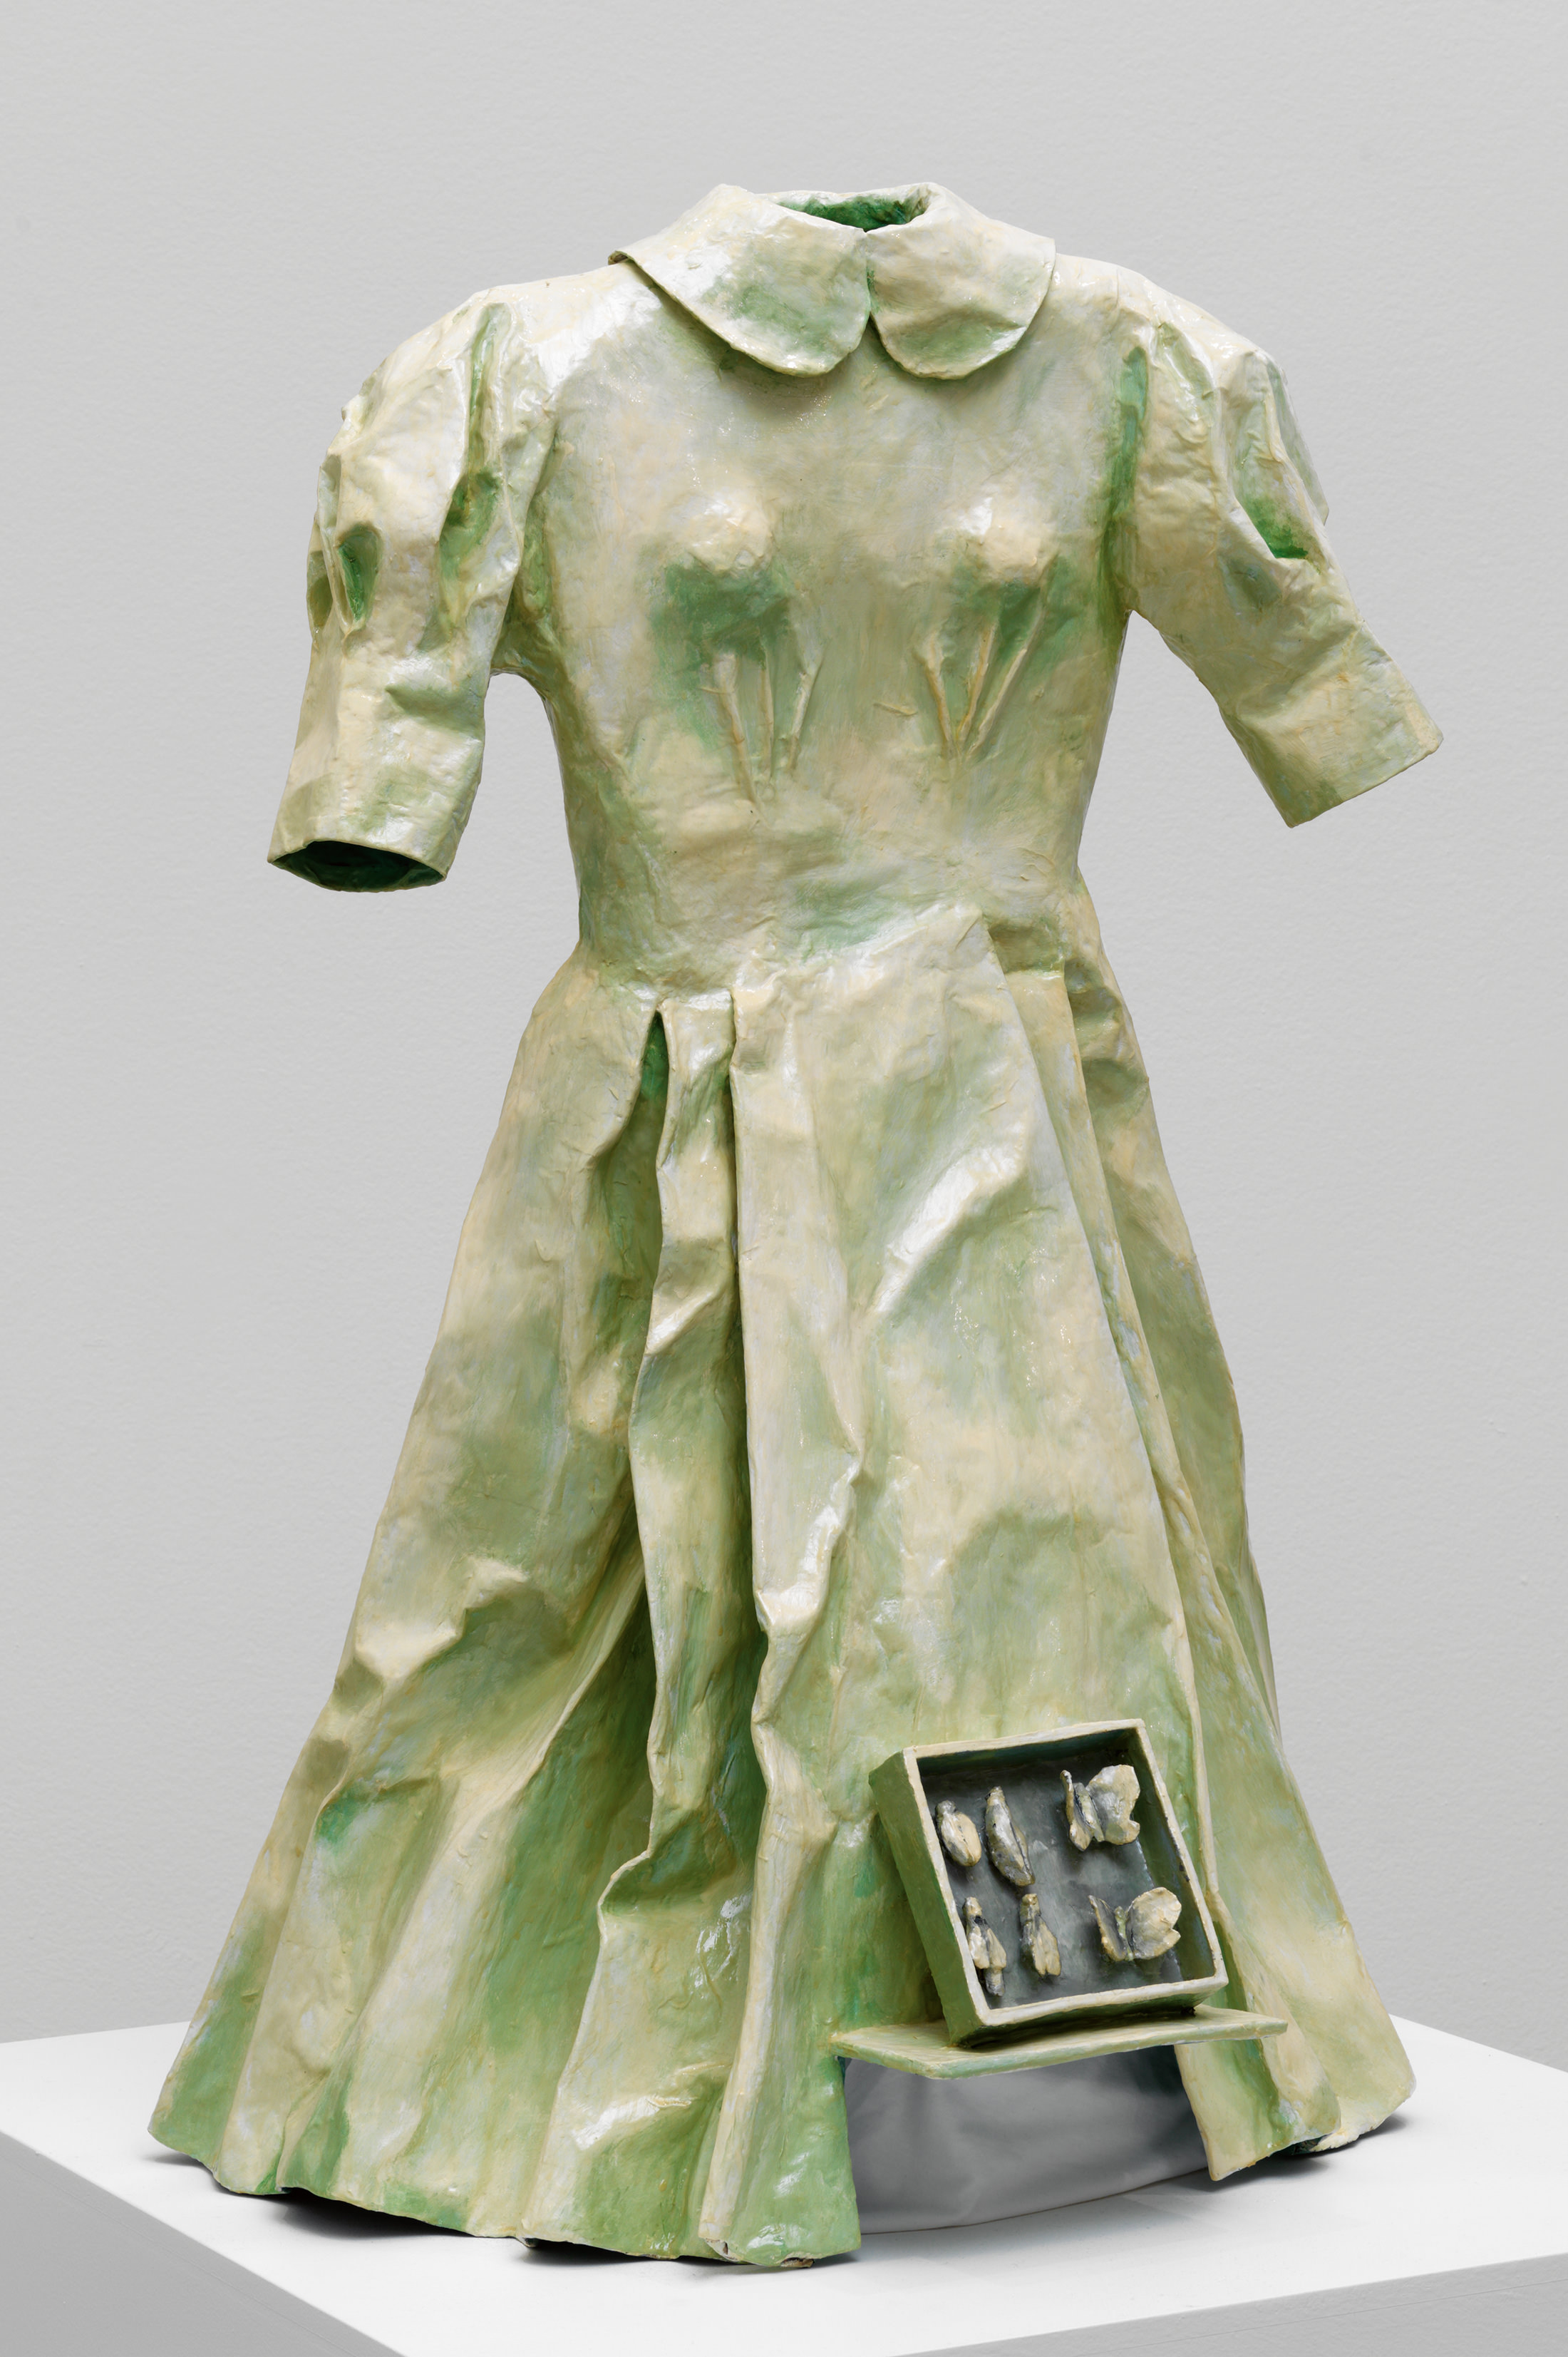 Gathie Falk “Dress with Insect Box” 1998